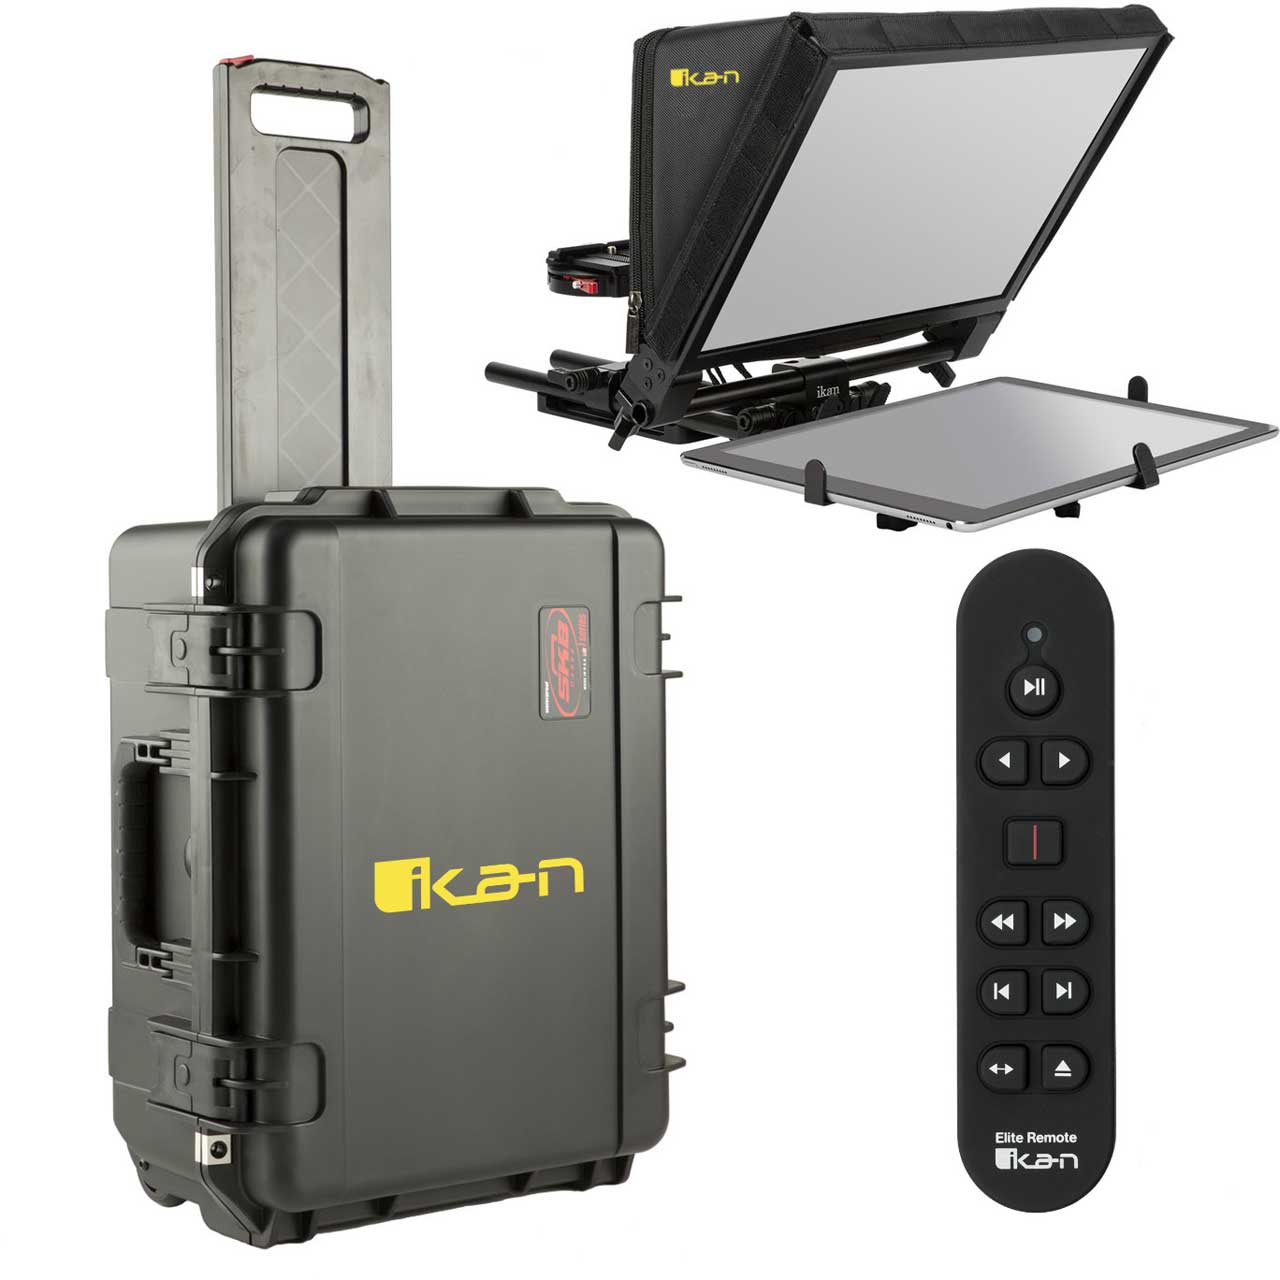 ikan PT-ELITE-PRO-TKRC Universal iPad Pro and Large Tablet Teleprompter with Elite Remote and Travel Case IKAN-PTELTPROTRC